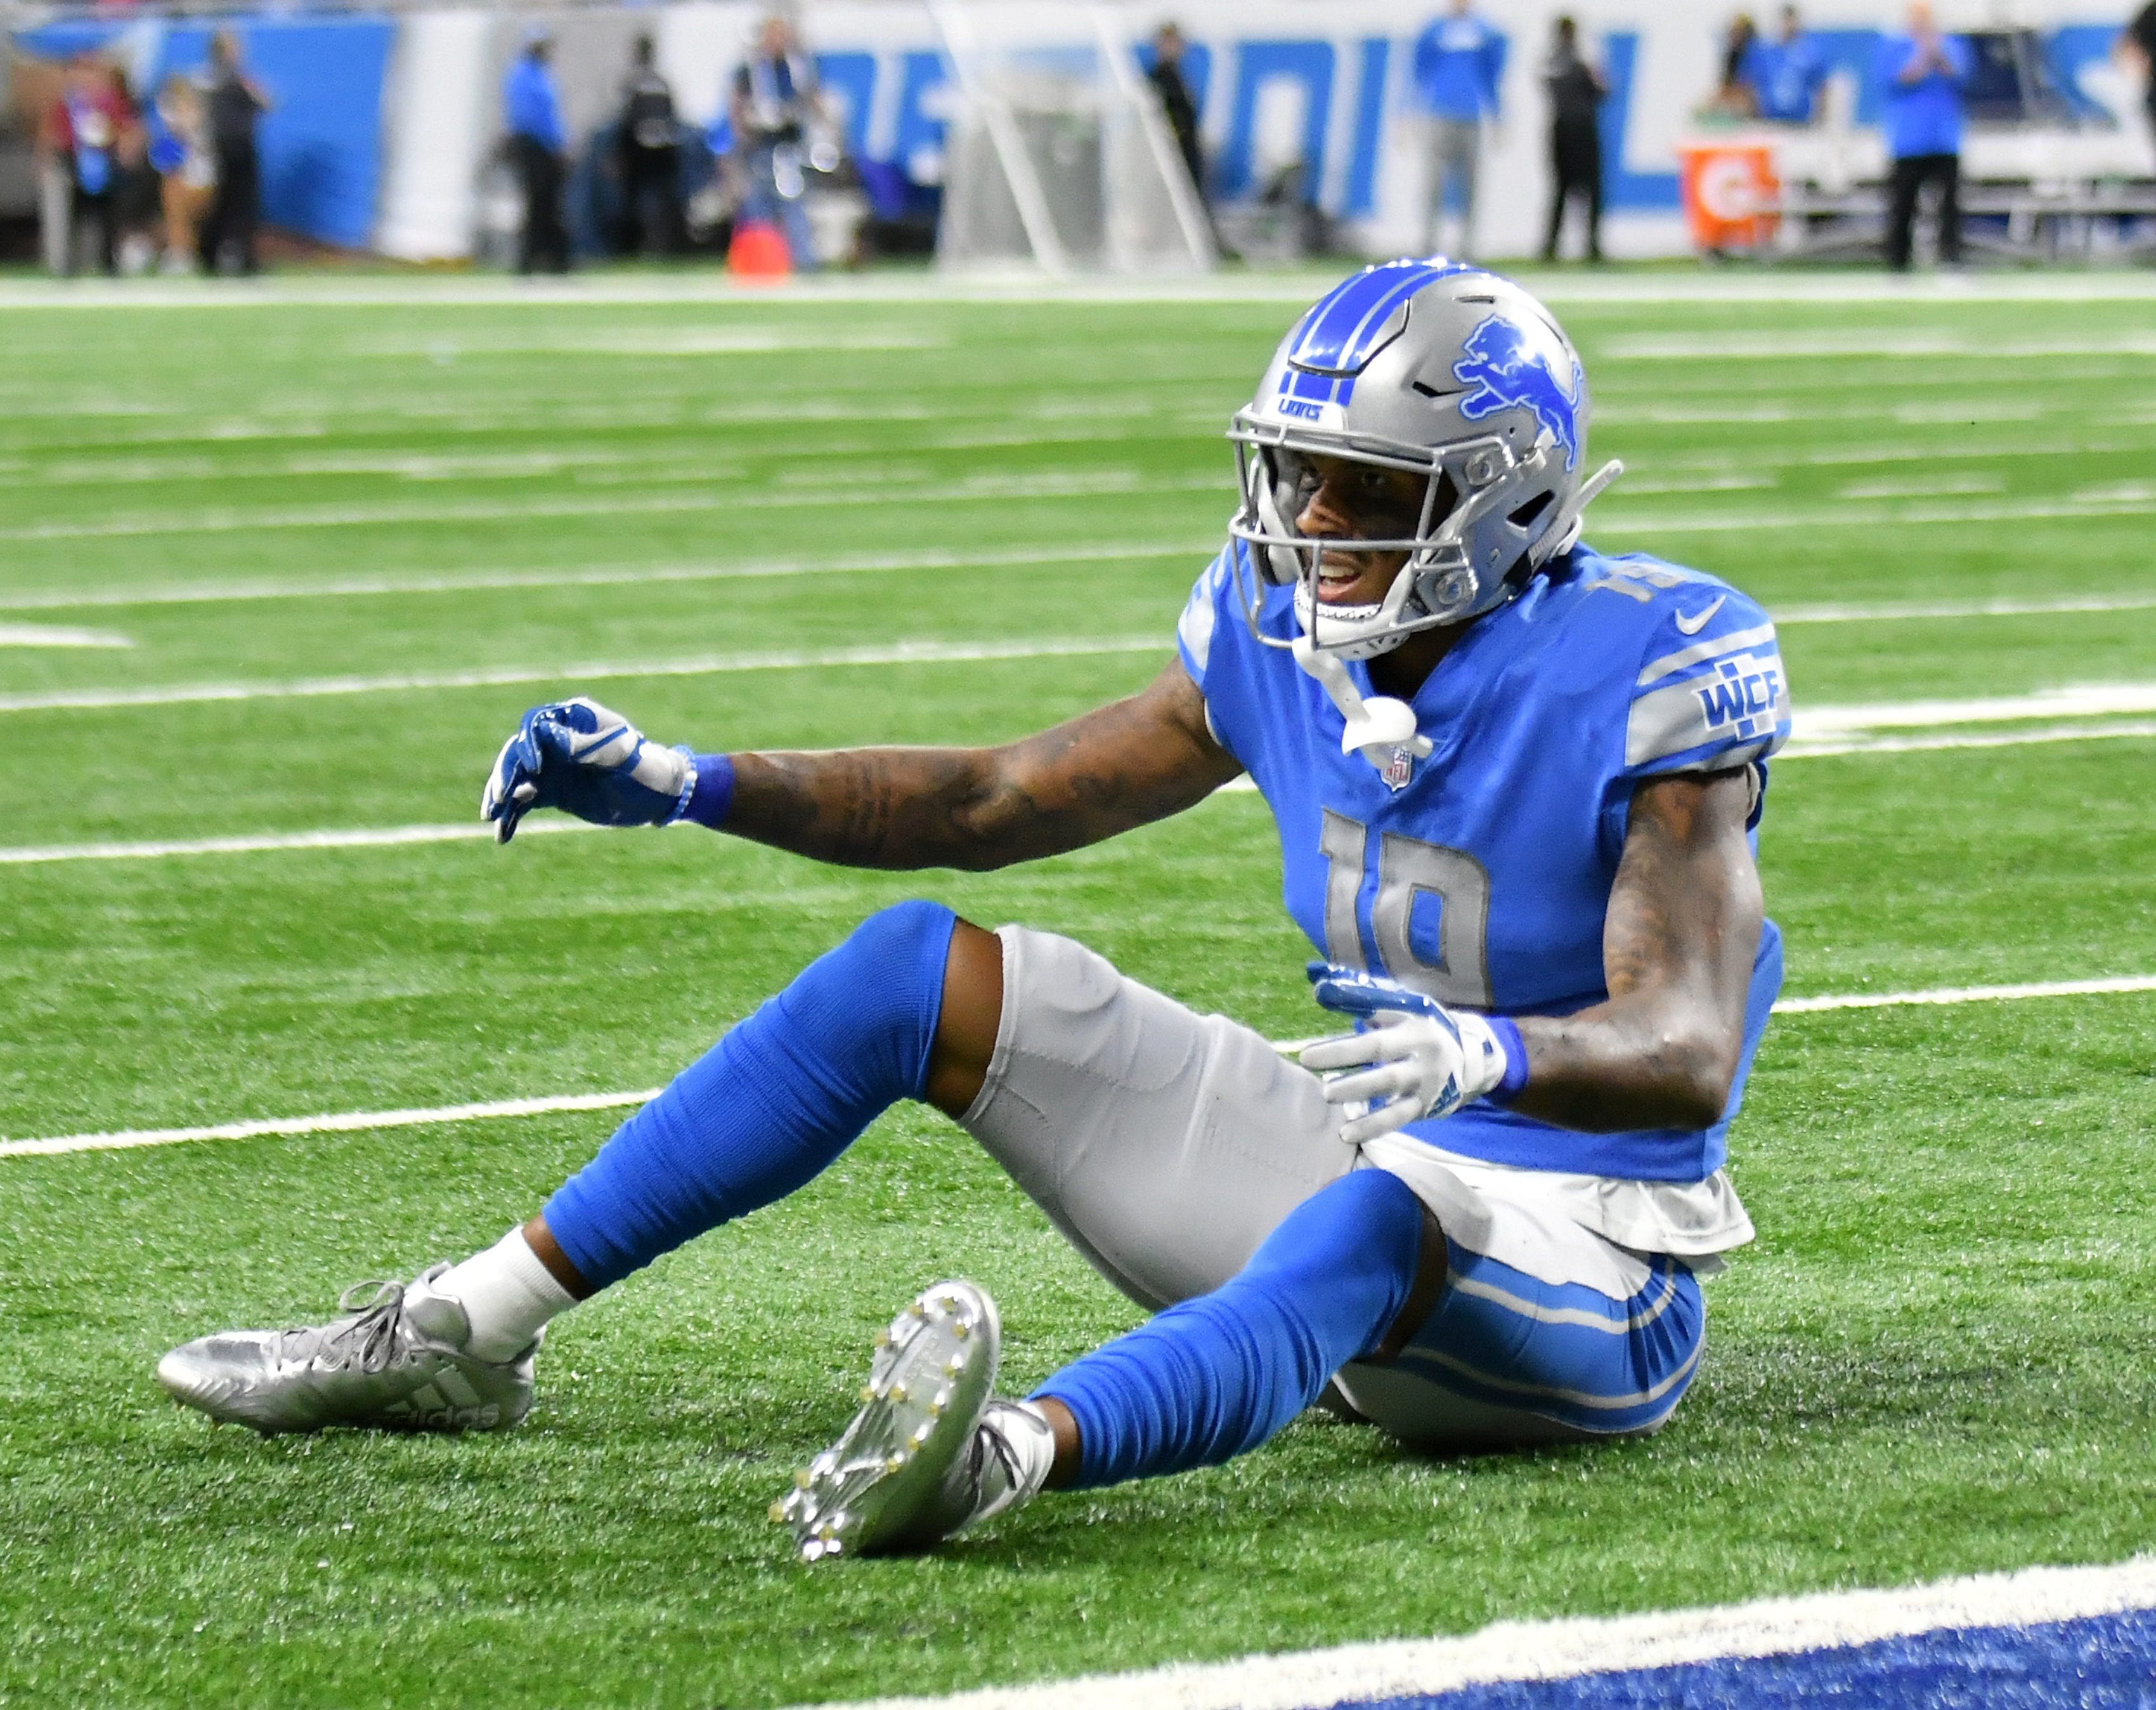 Lions' Kenny Golladay after the play at the goal line in the second quarter.